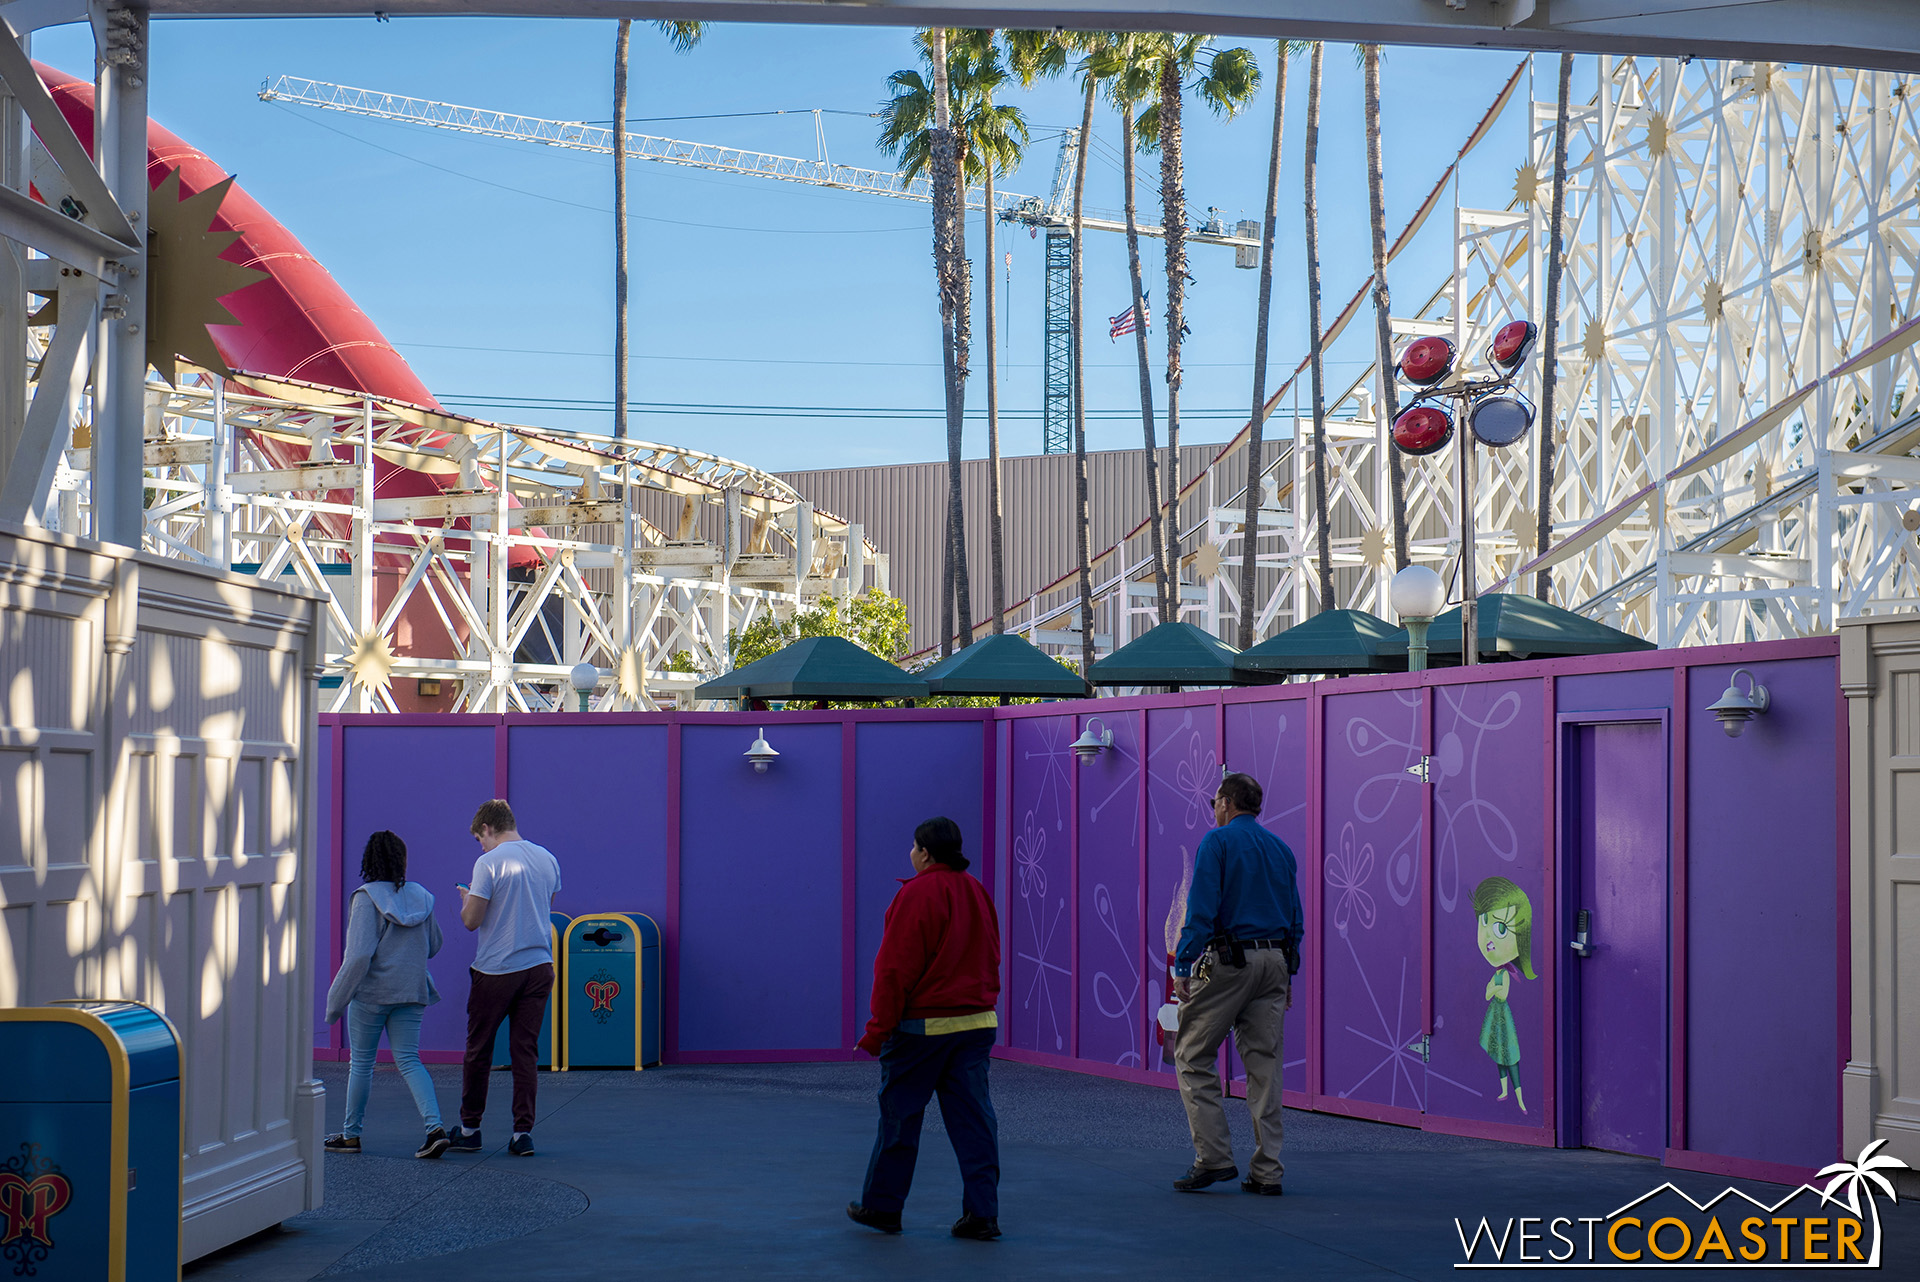  Hey look!  There’s something new with… the canopies? 